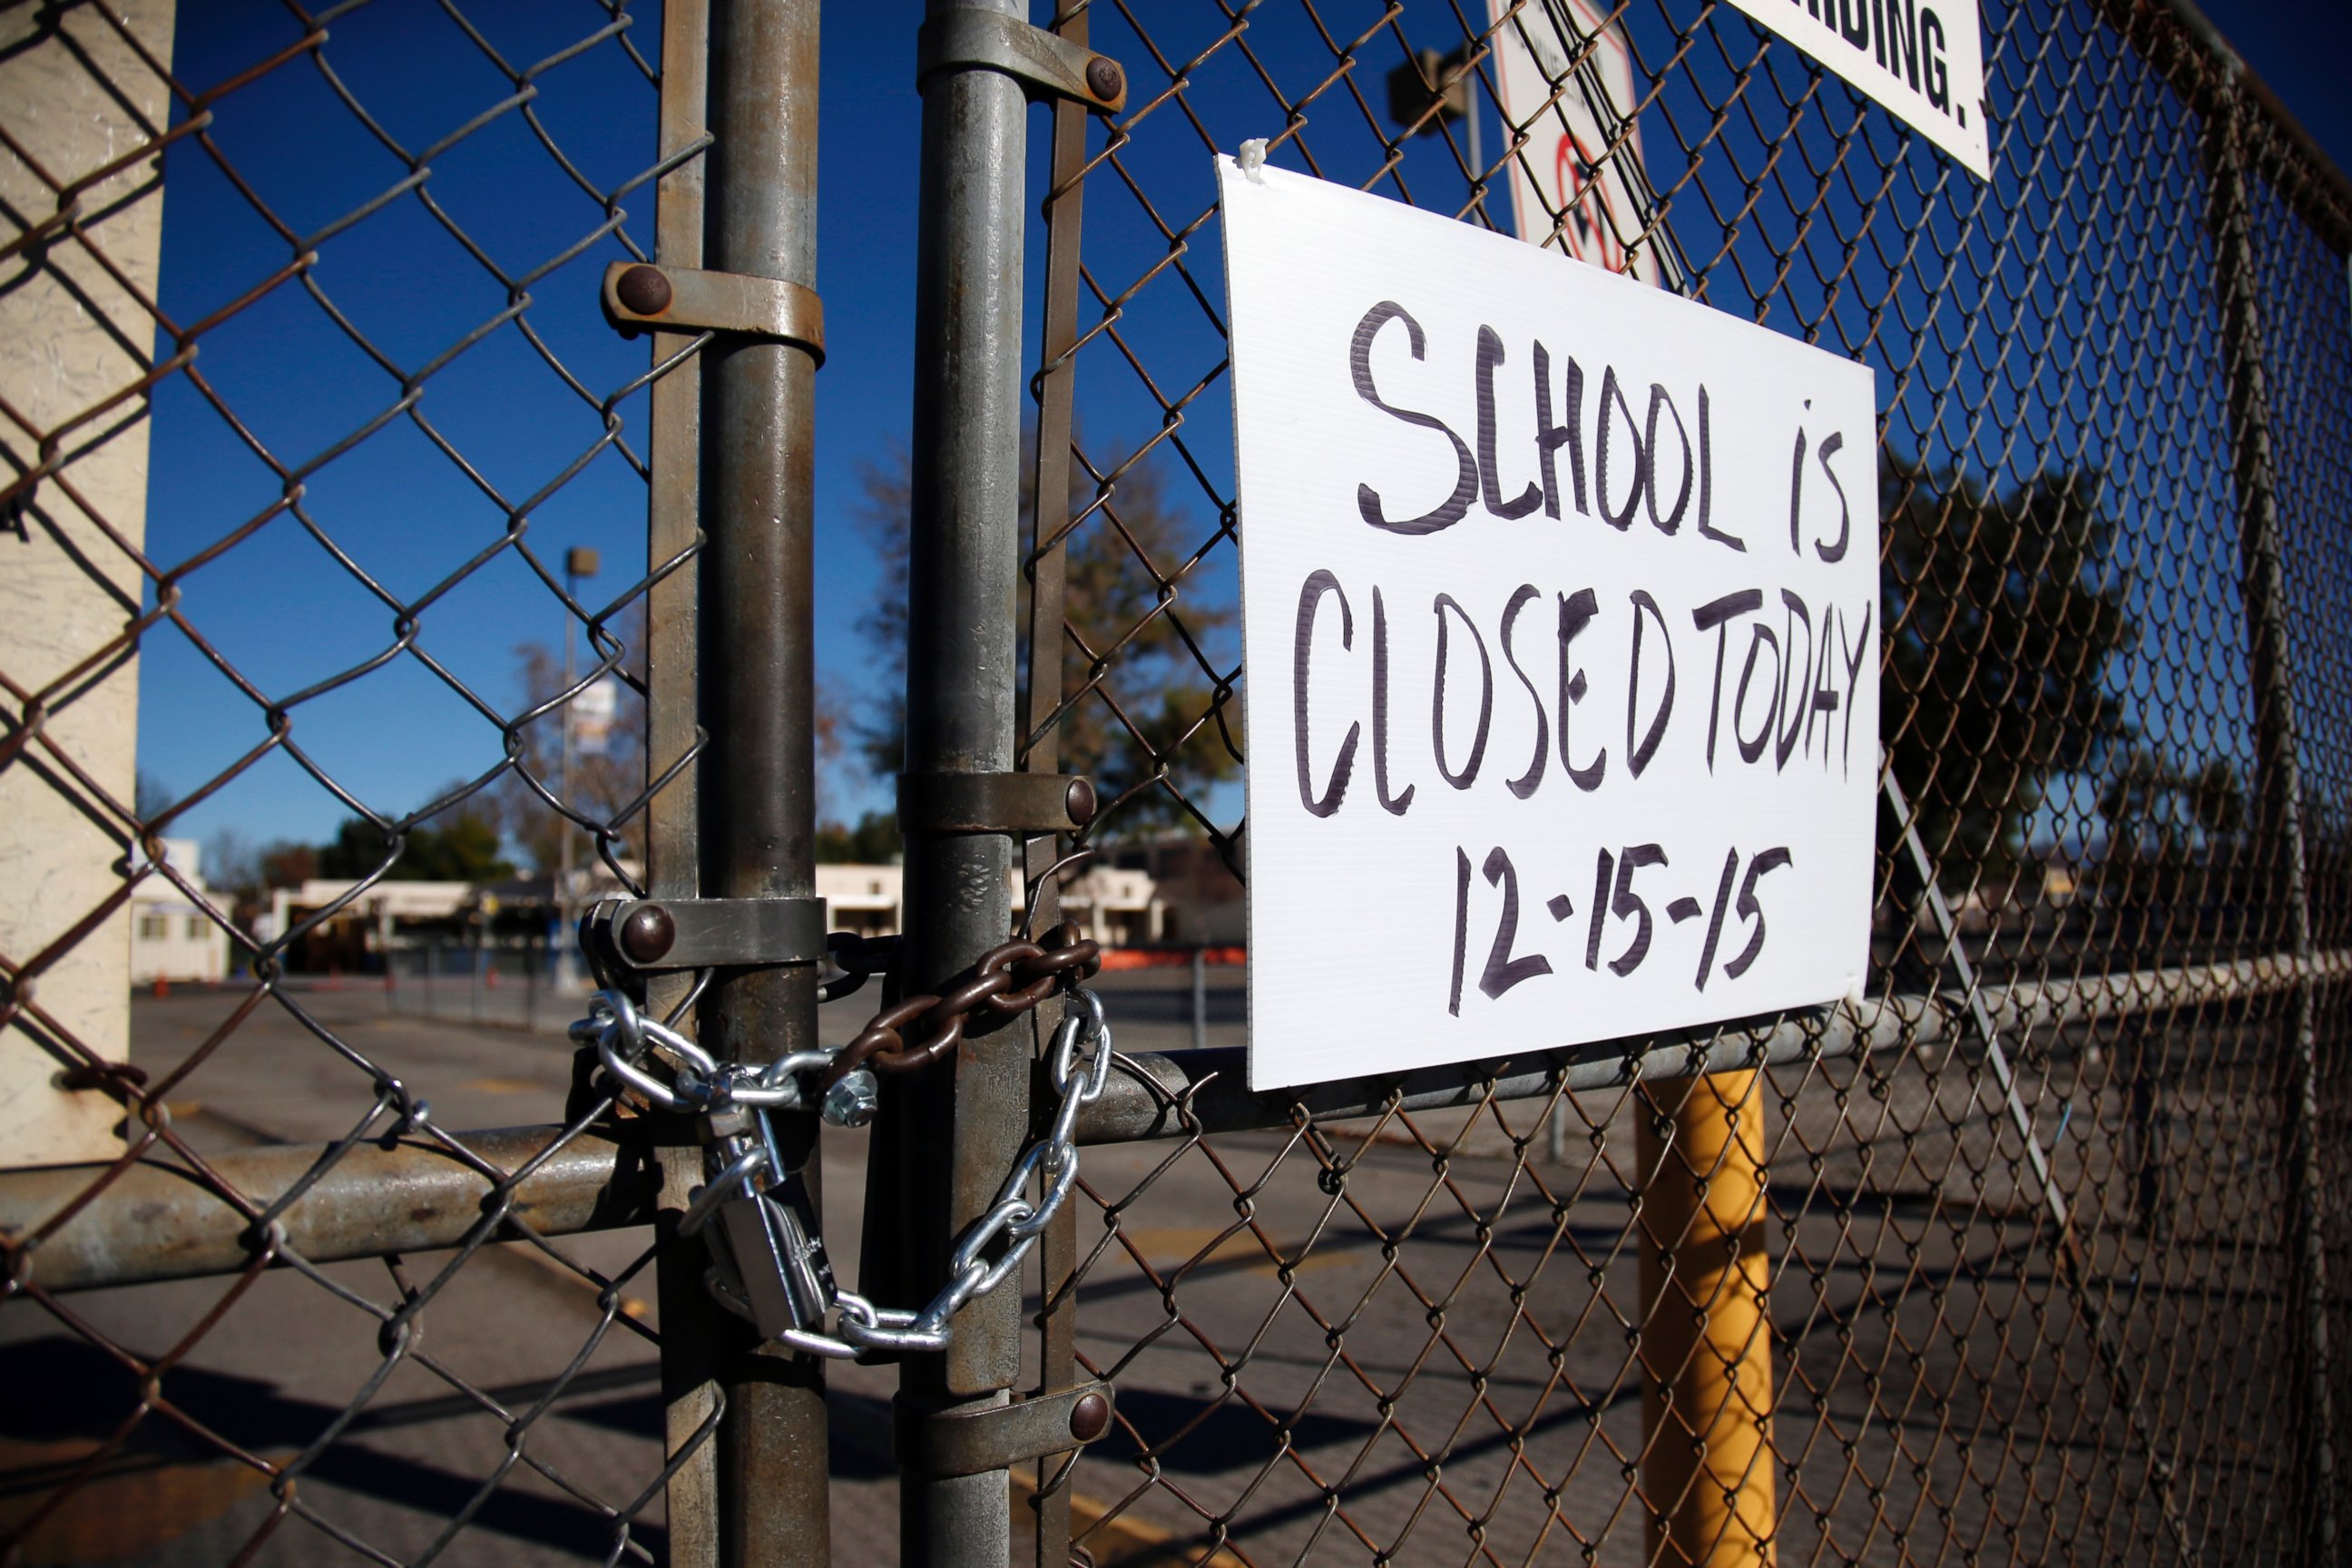 PHOTO: A gate to Birmingham Community Charter High School is locked with a sign stating that school is closed, Dec. 15, 2015, in Van Nuys, Calif.